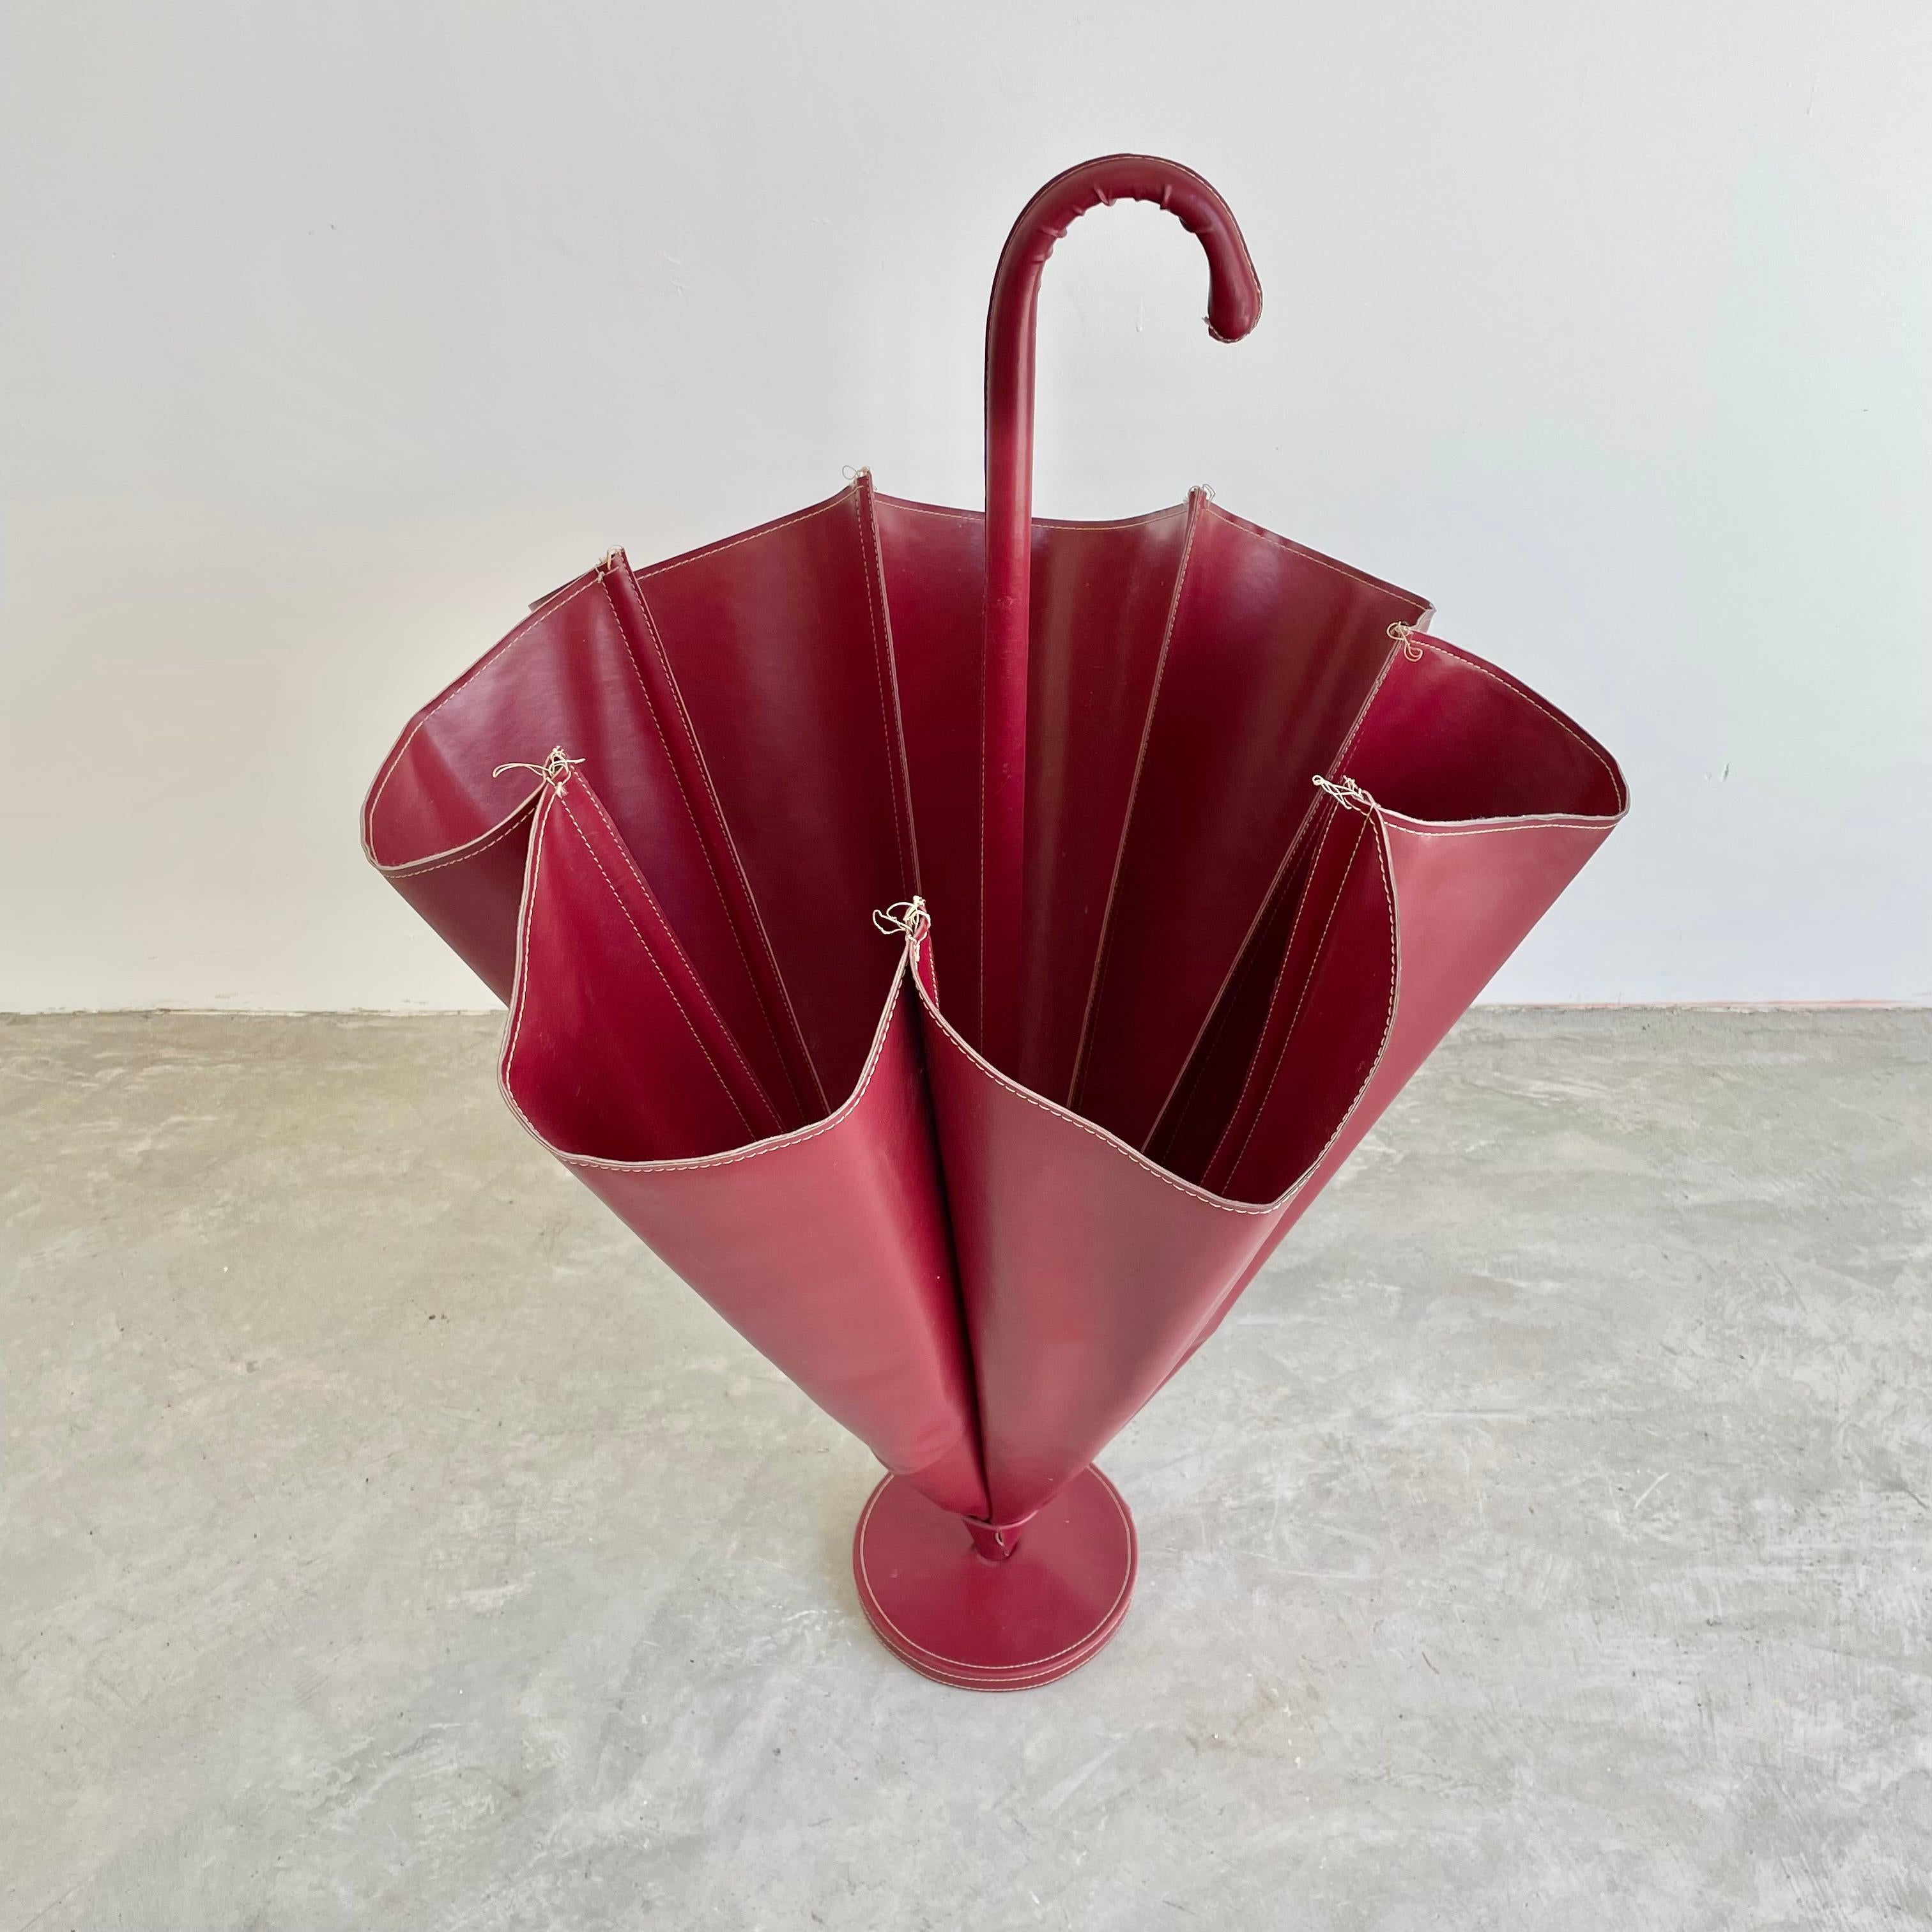 Art Deco Jacques Adnet Style Red Skai Umbrella Stand, 1950s France